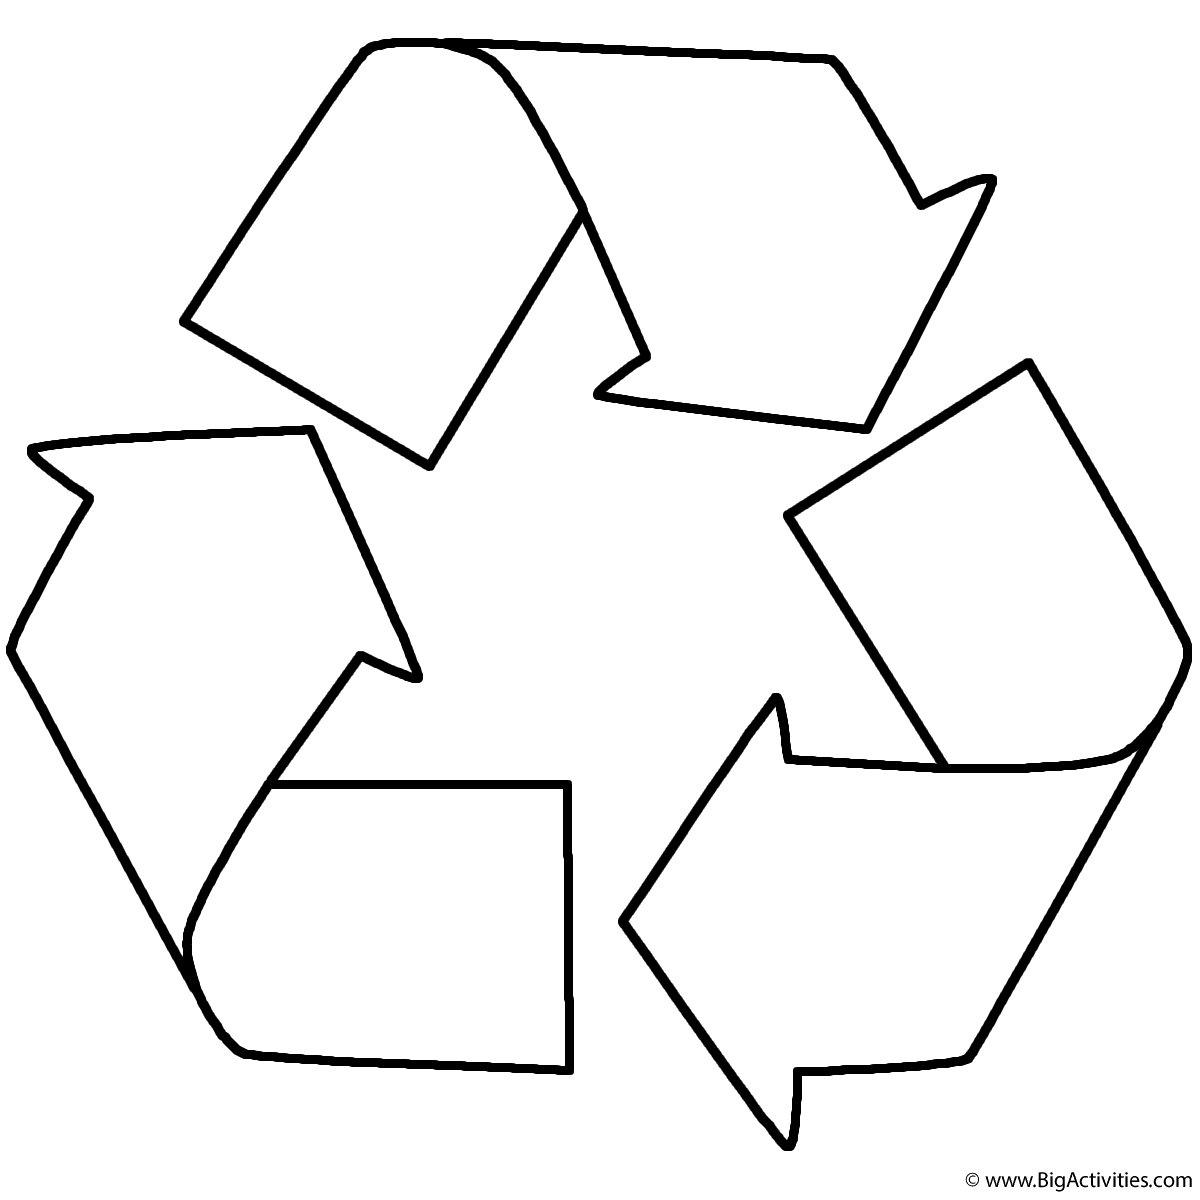 Recycle - Coloring Page (Earth Day)